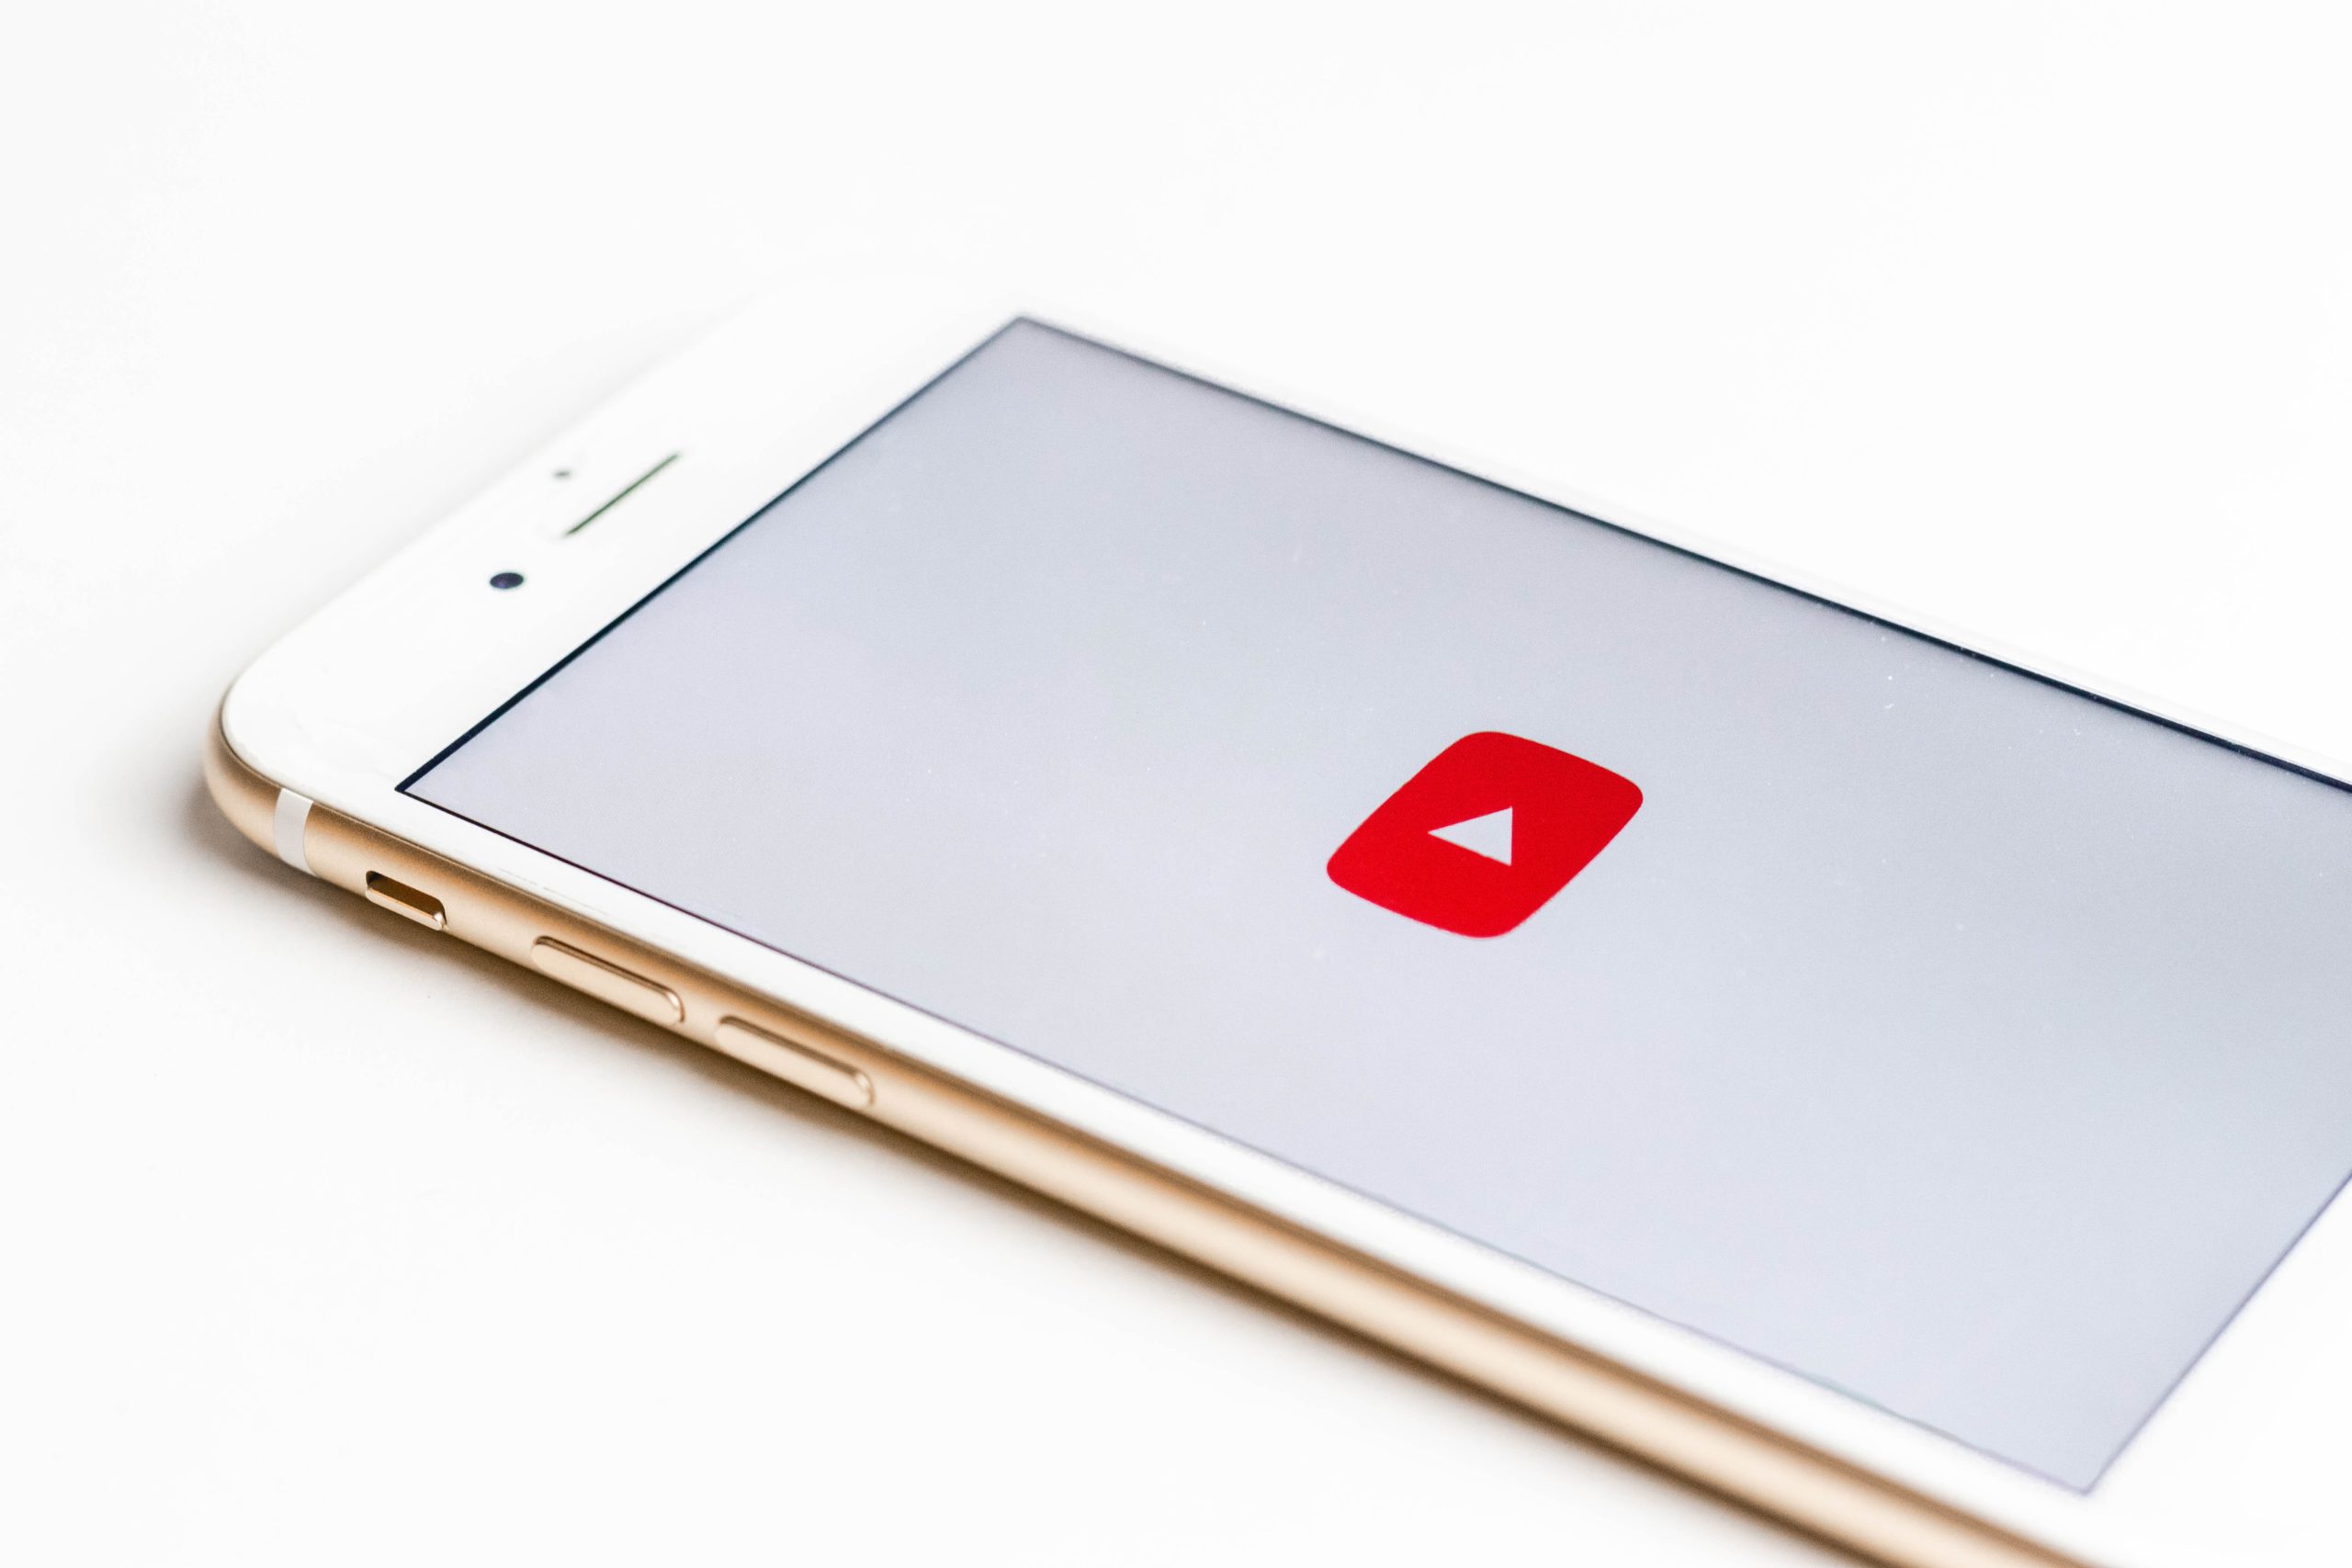 Why Should You Use Video Ads as a Publisher?